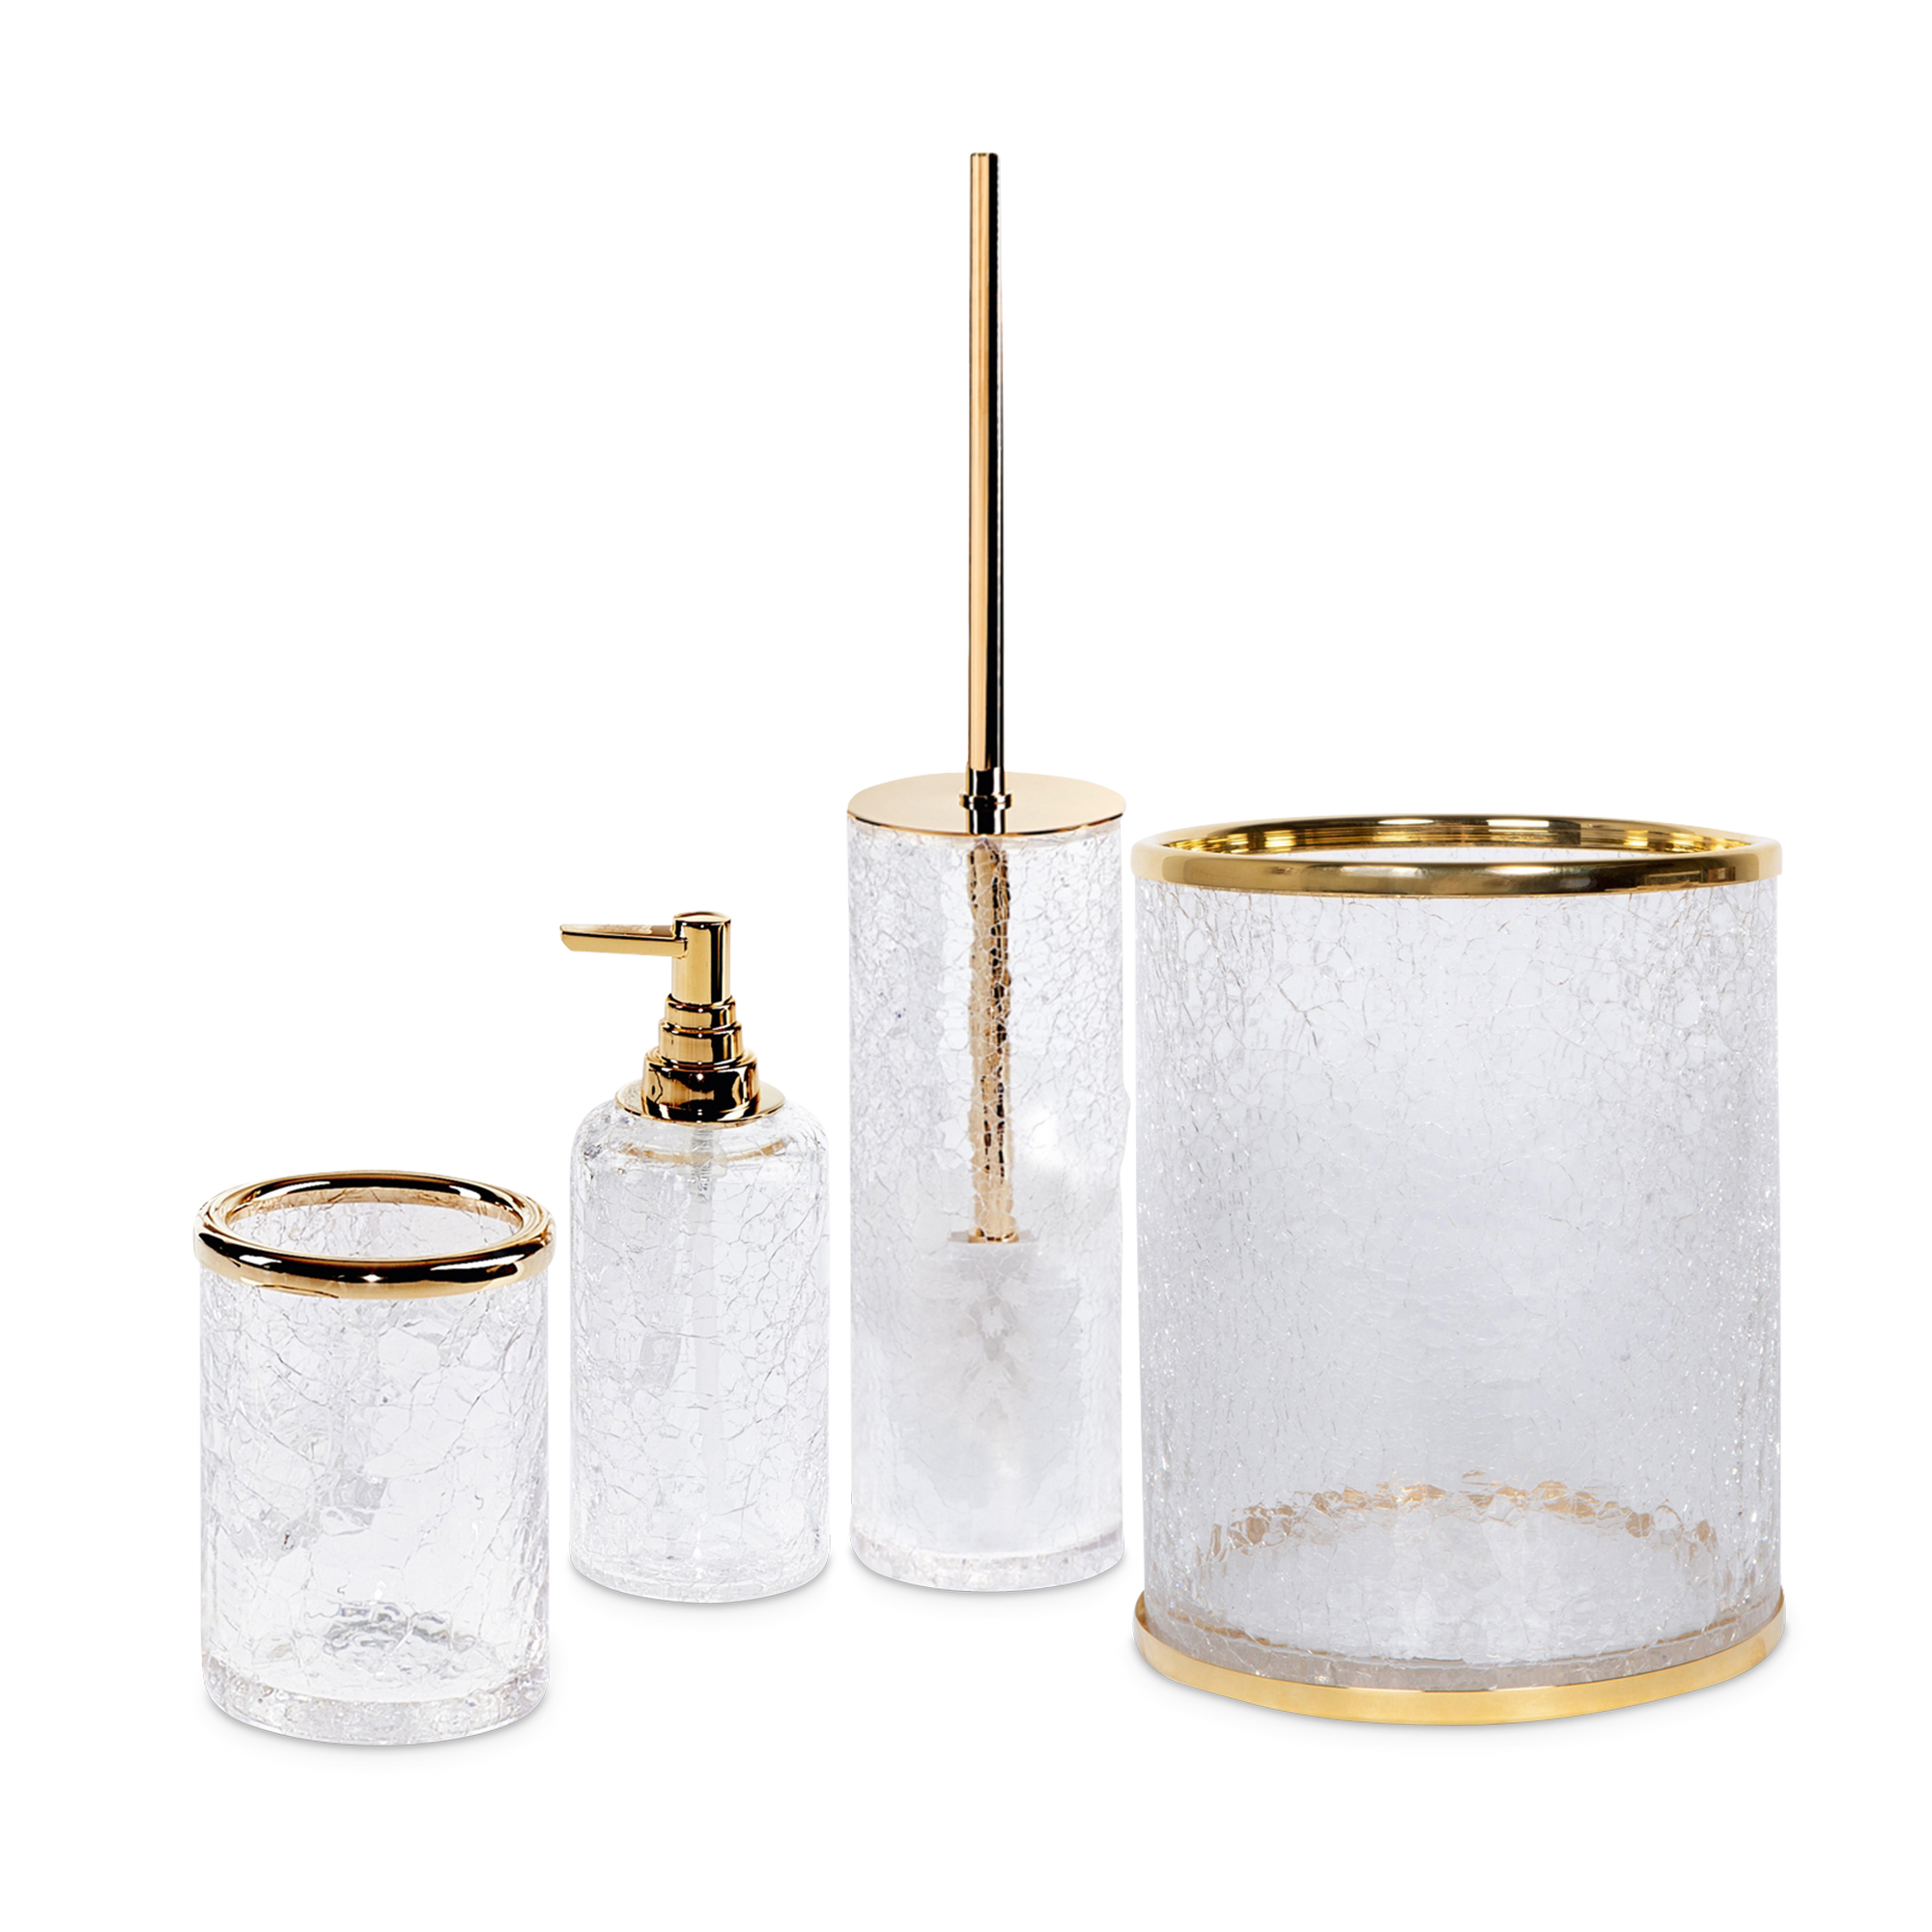 The Cracked Accessories collection features delicate cracked glass with polished gold details.